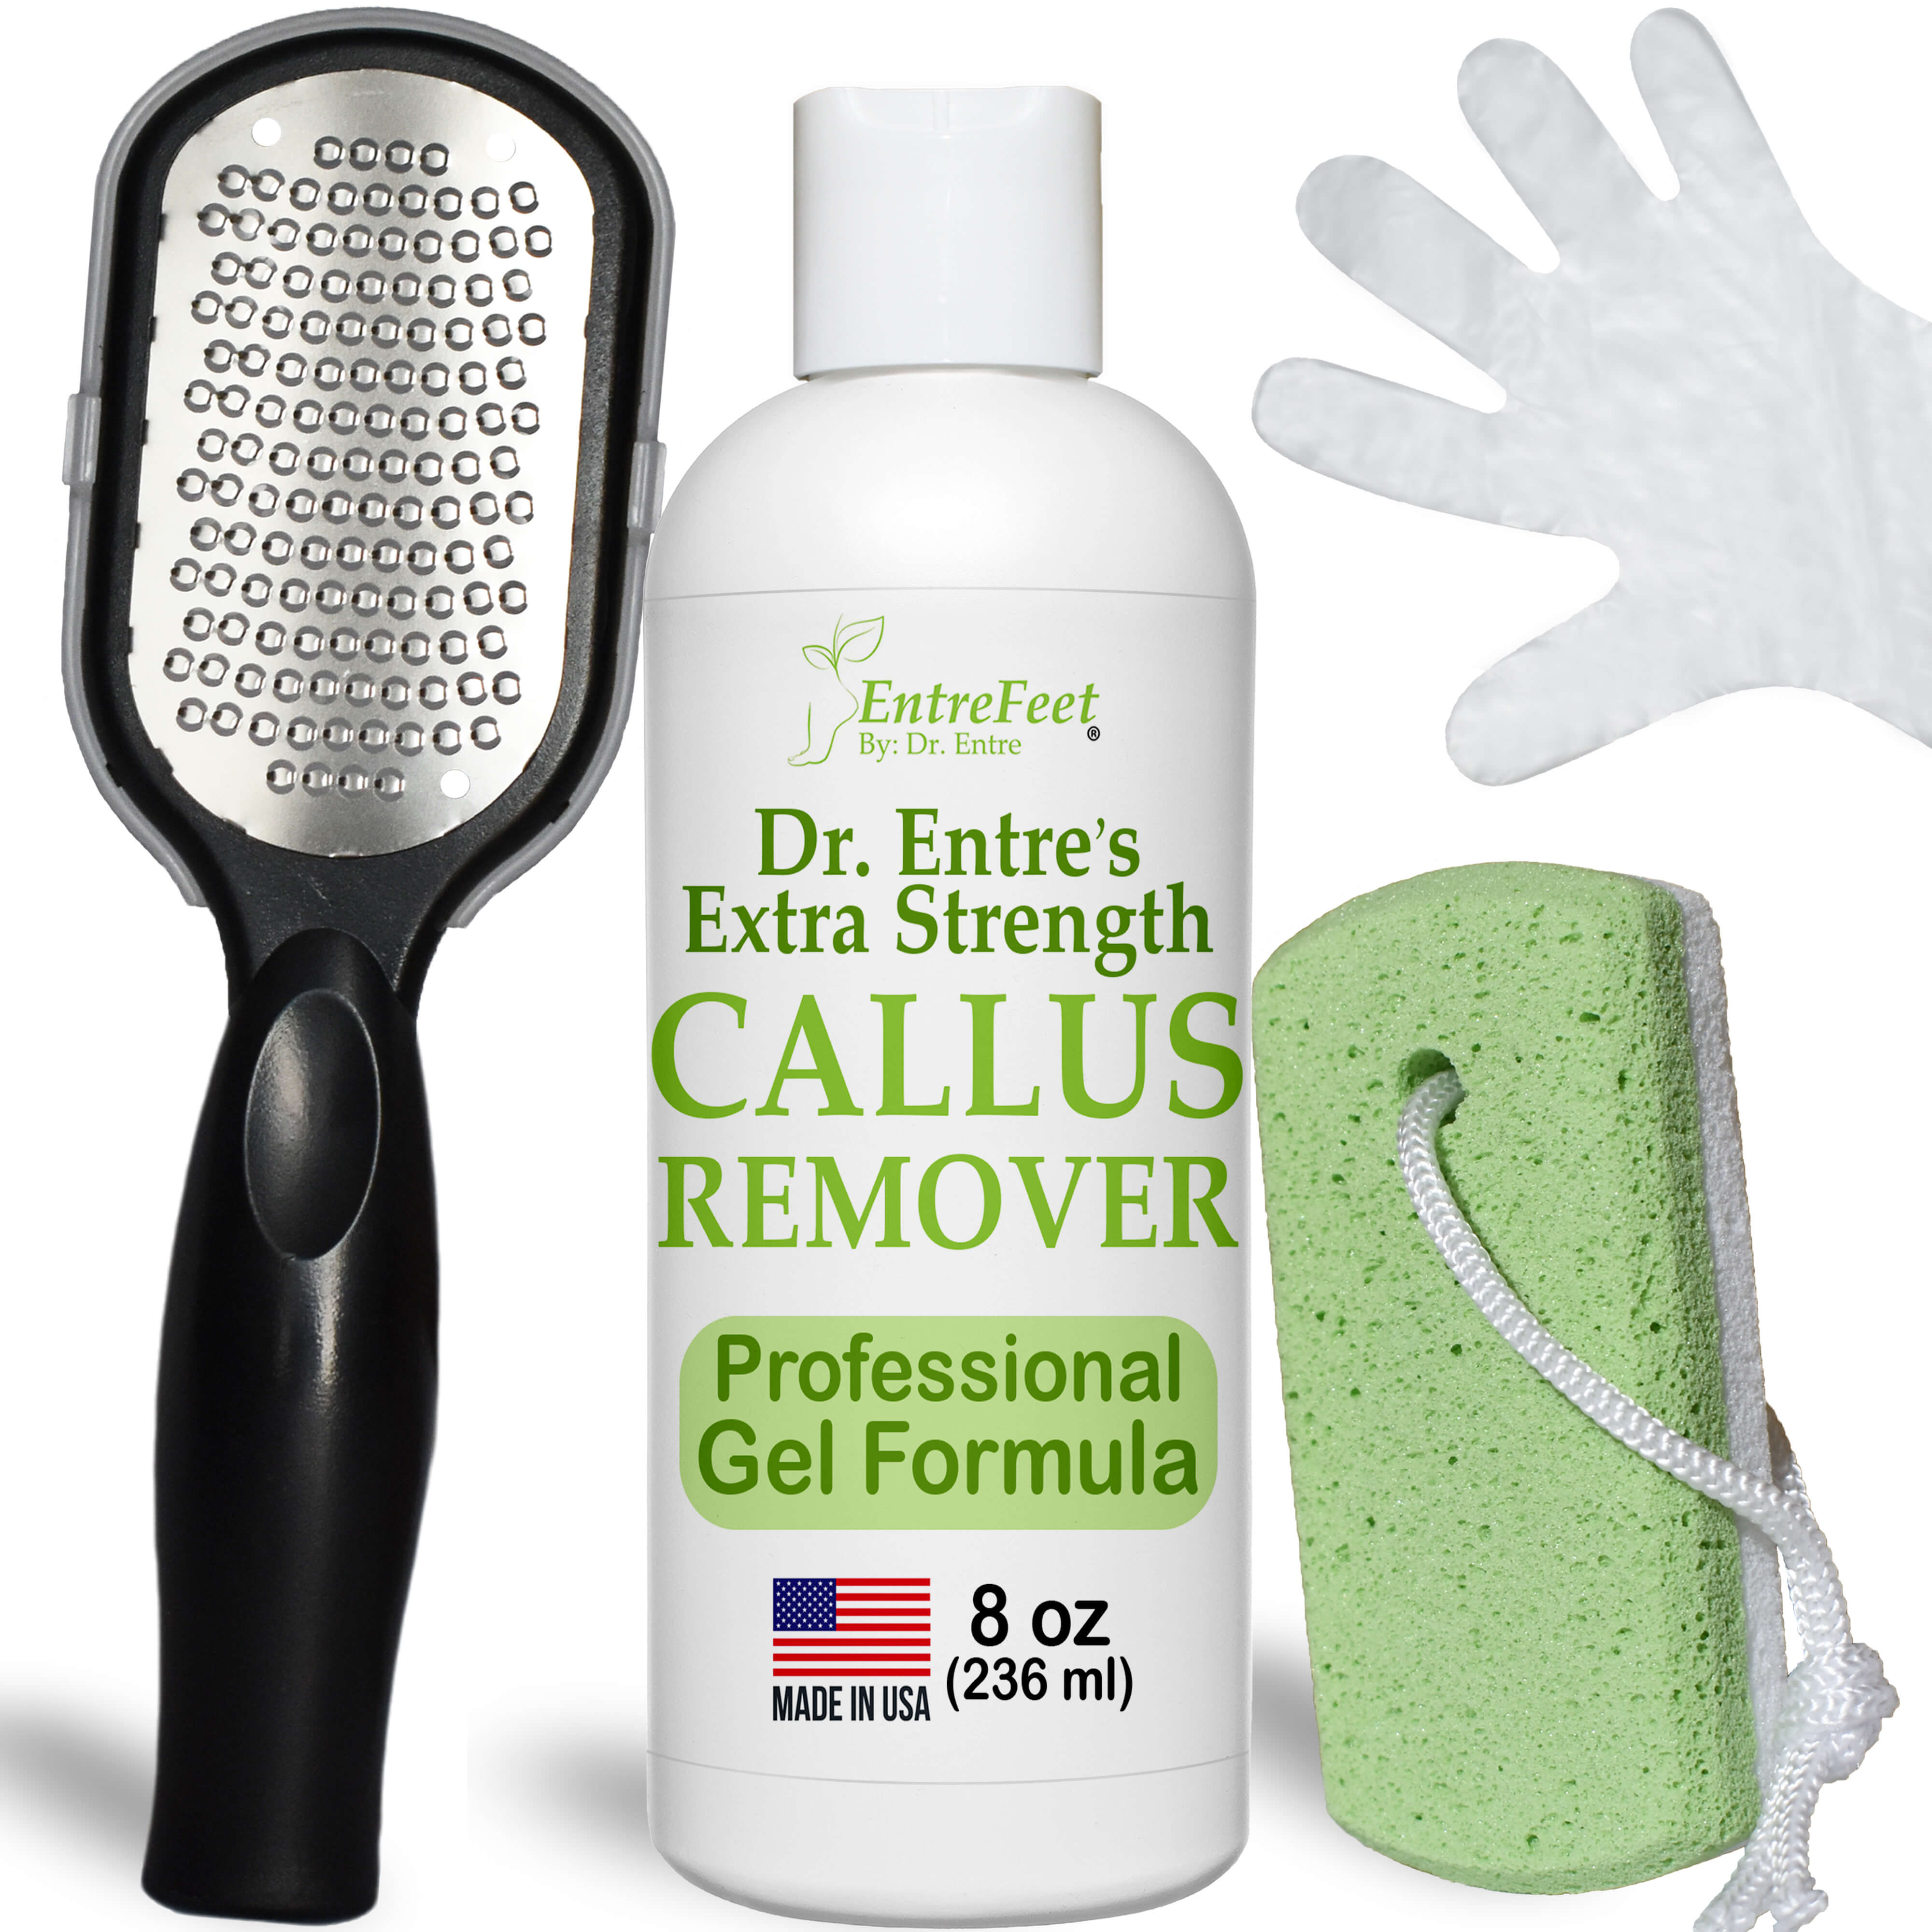 Dr Foot Callus Remover Gel Helps to Remove Calluses and Corns - 100ml & Dr  Foot Glass File Callus Remover